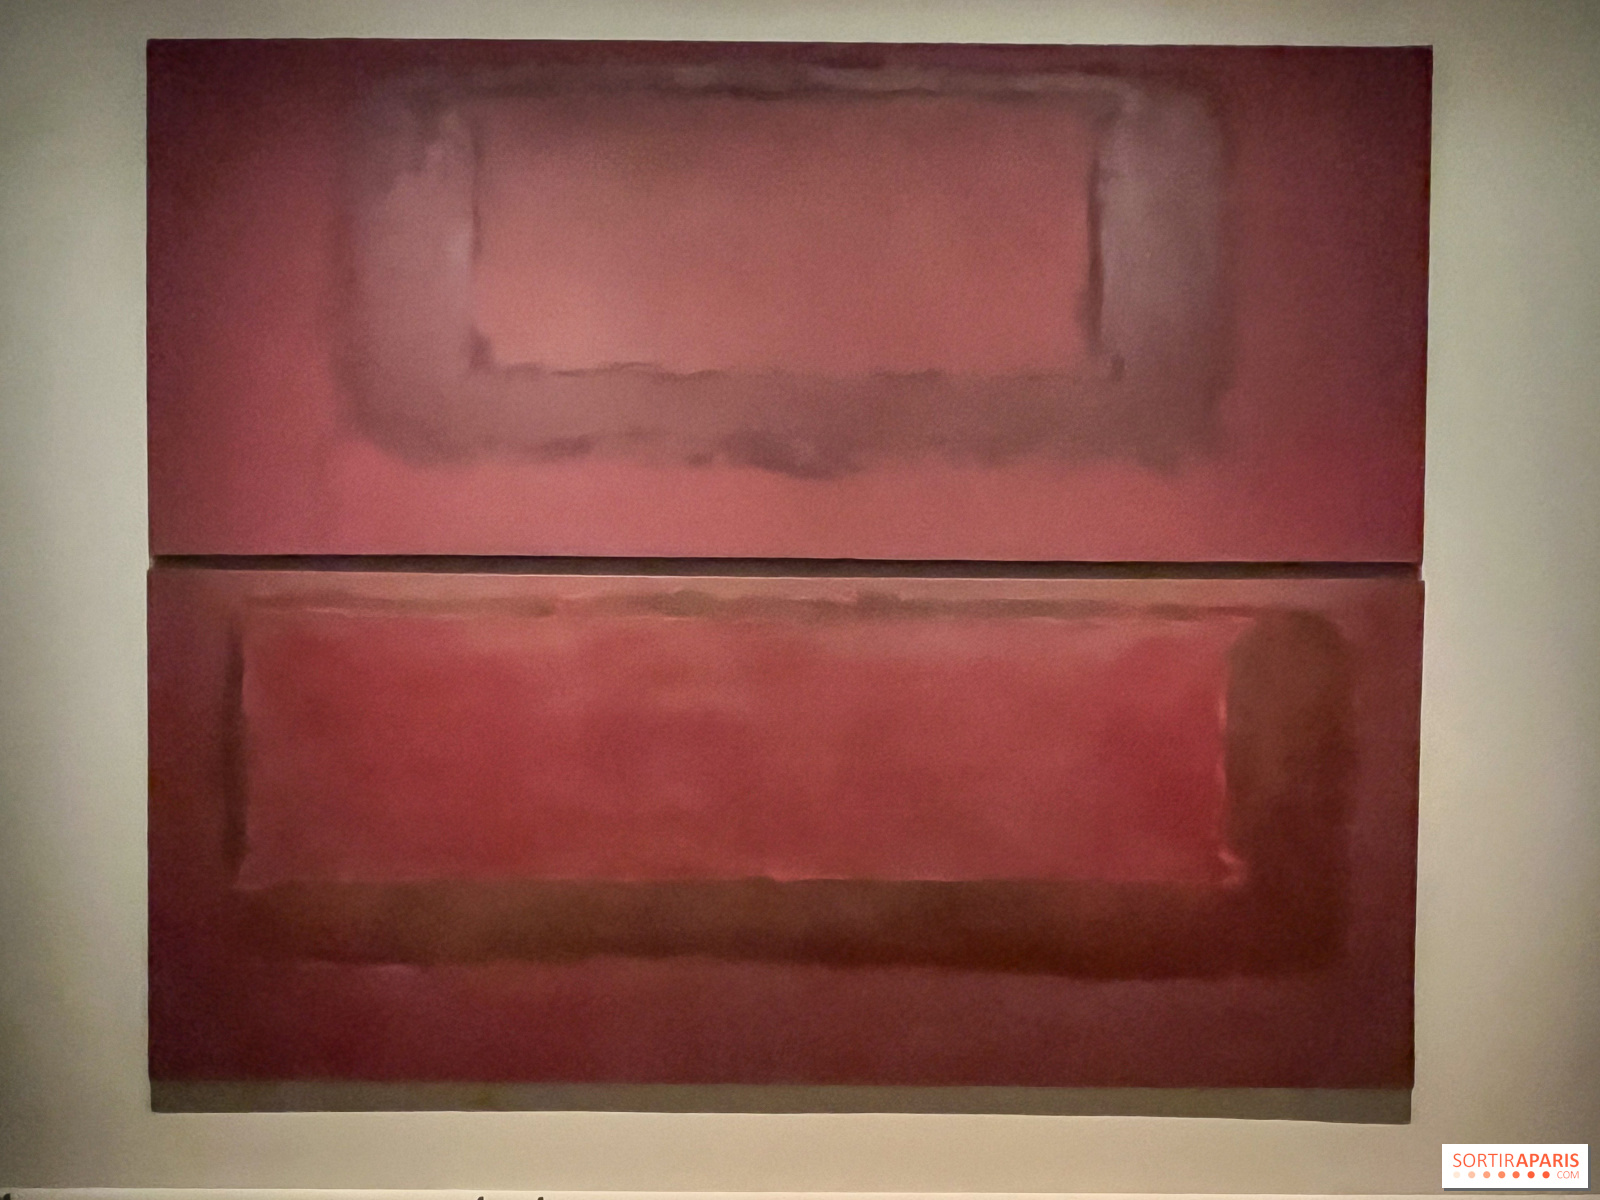 Rothko at the Louis Vuitton Foundation: When color throbs